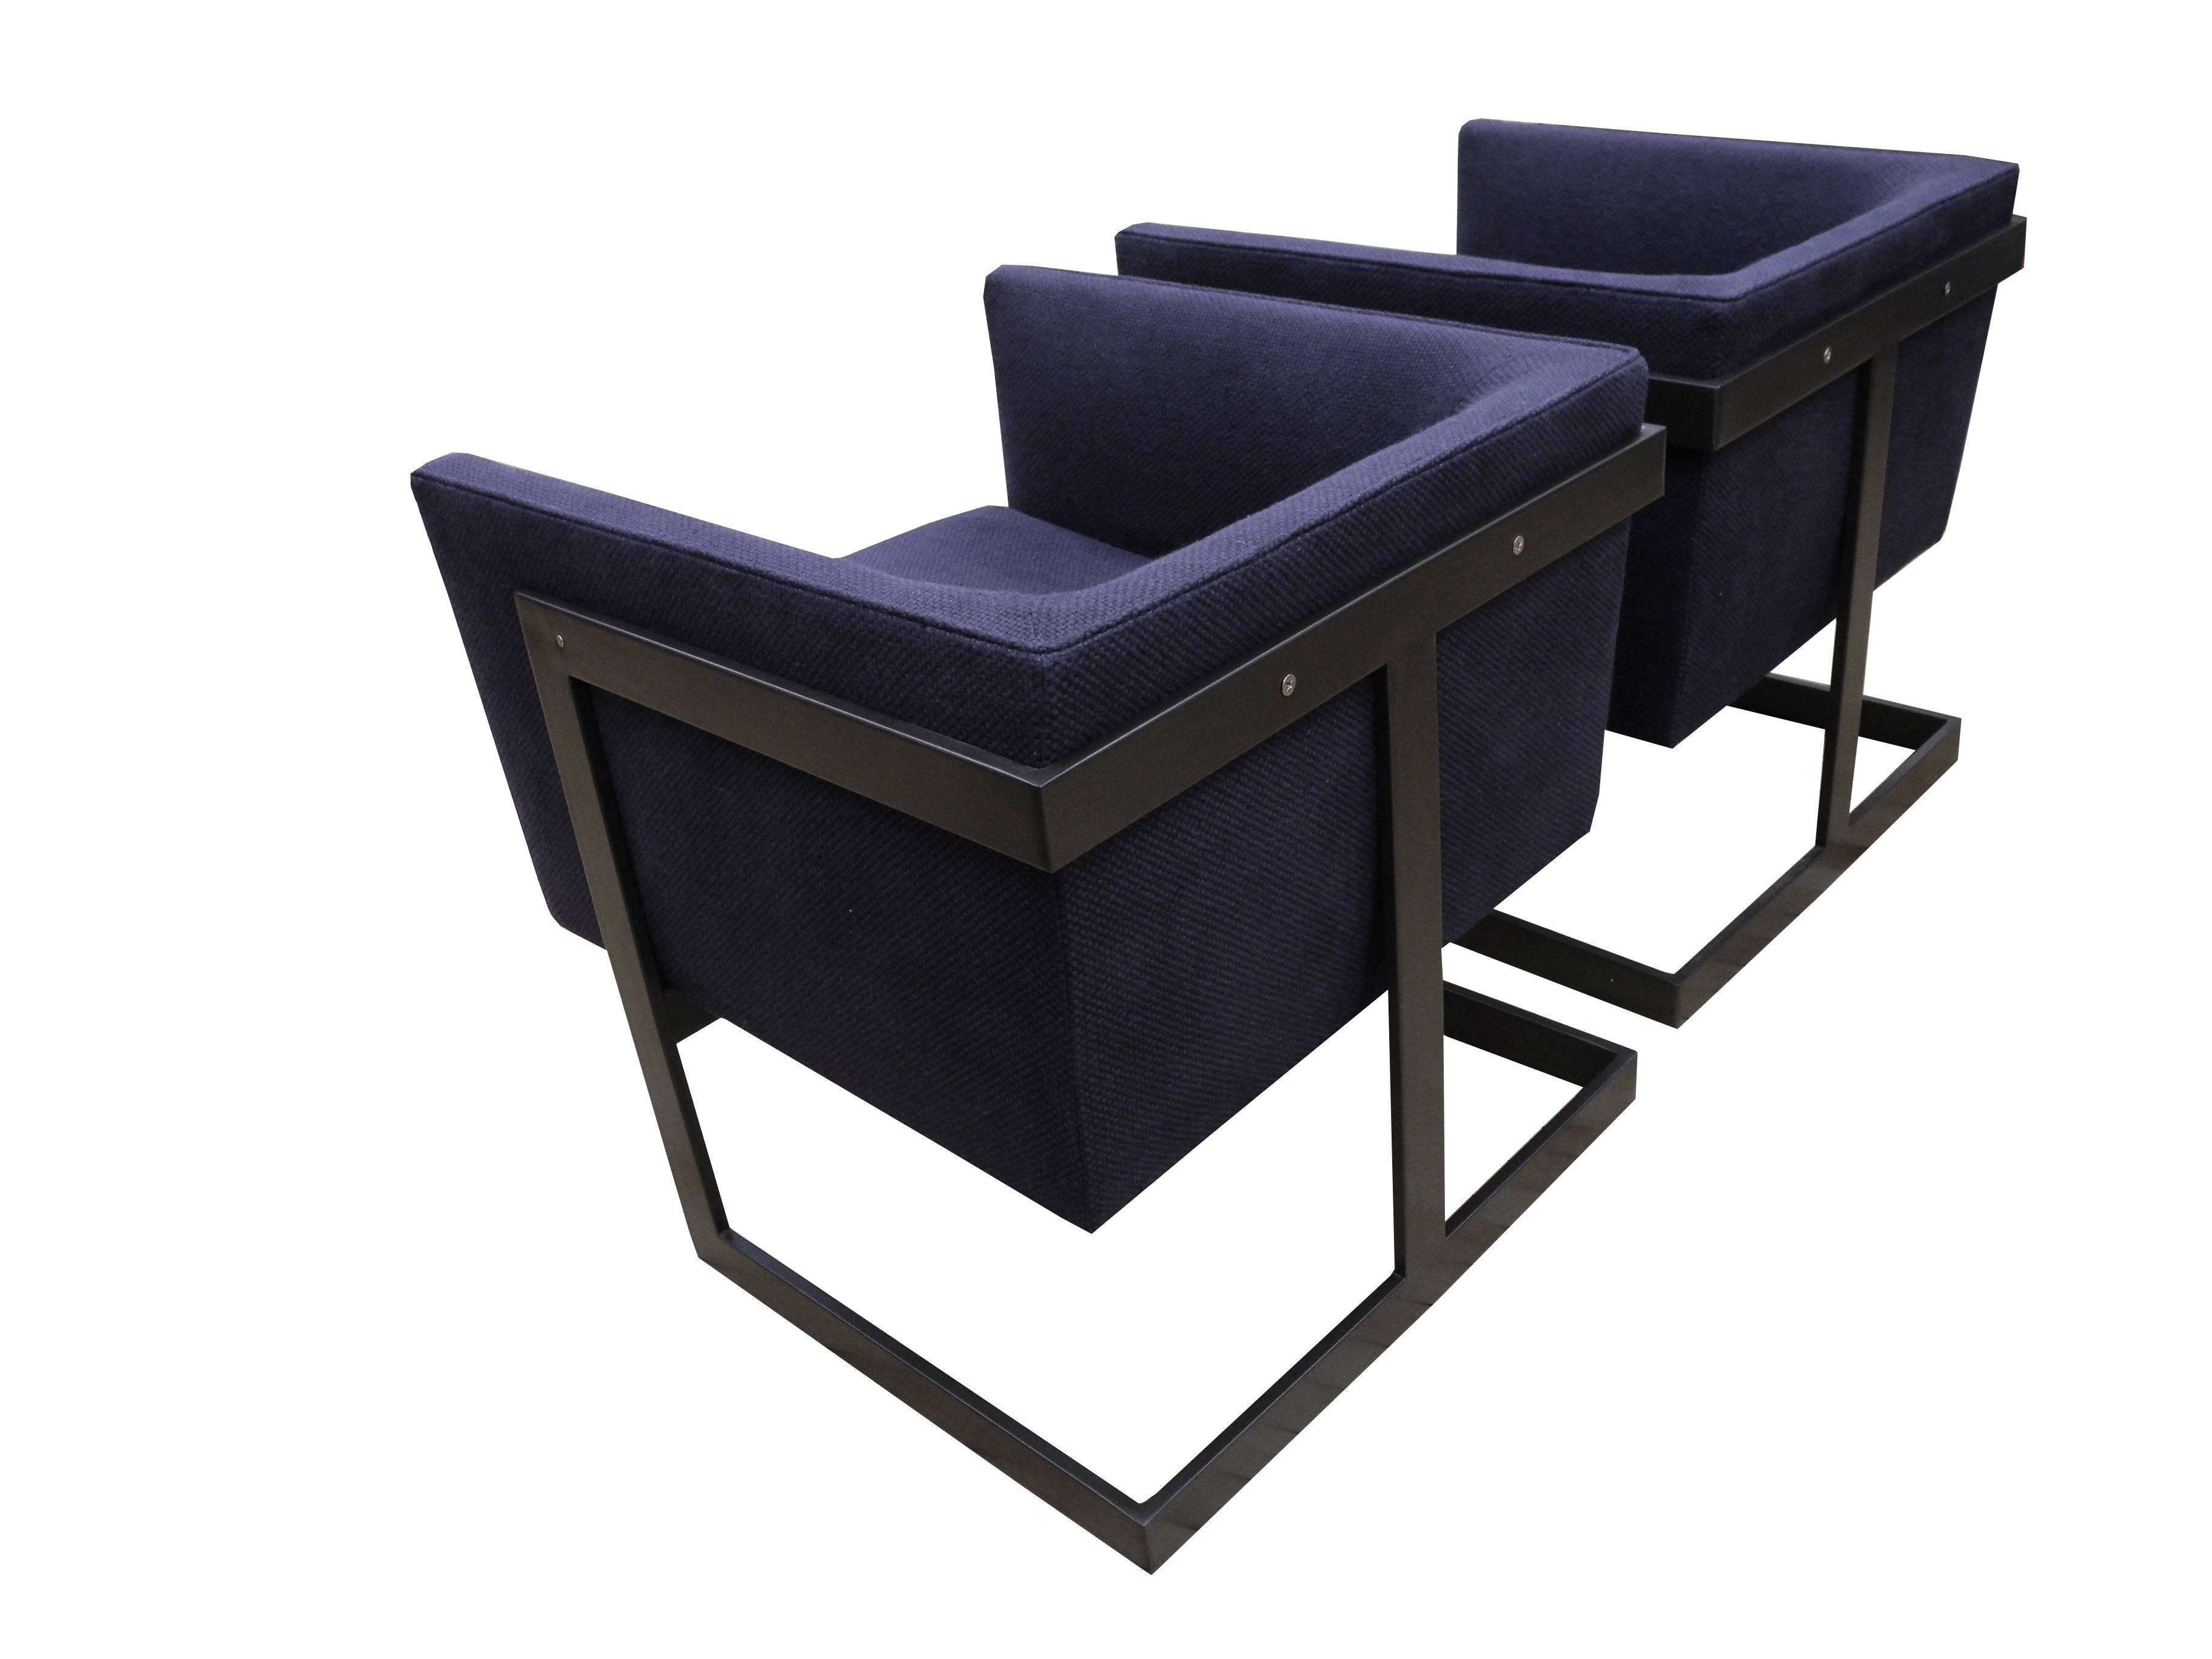 American Pair of Petite Modern Bronze and Navy Cubed Armchairs by Milo Baughman